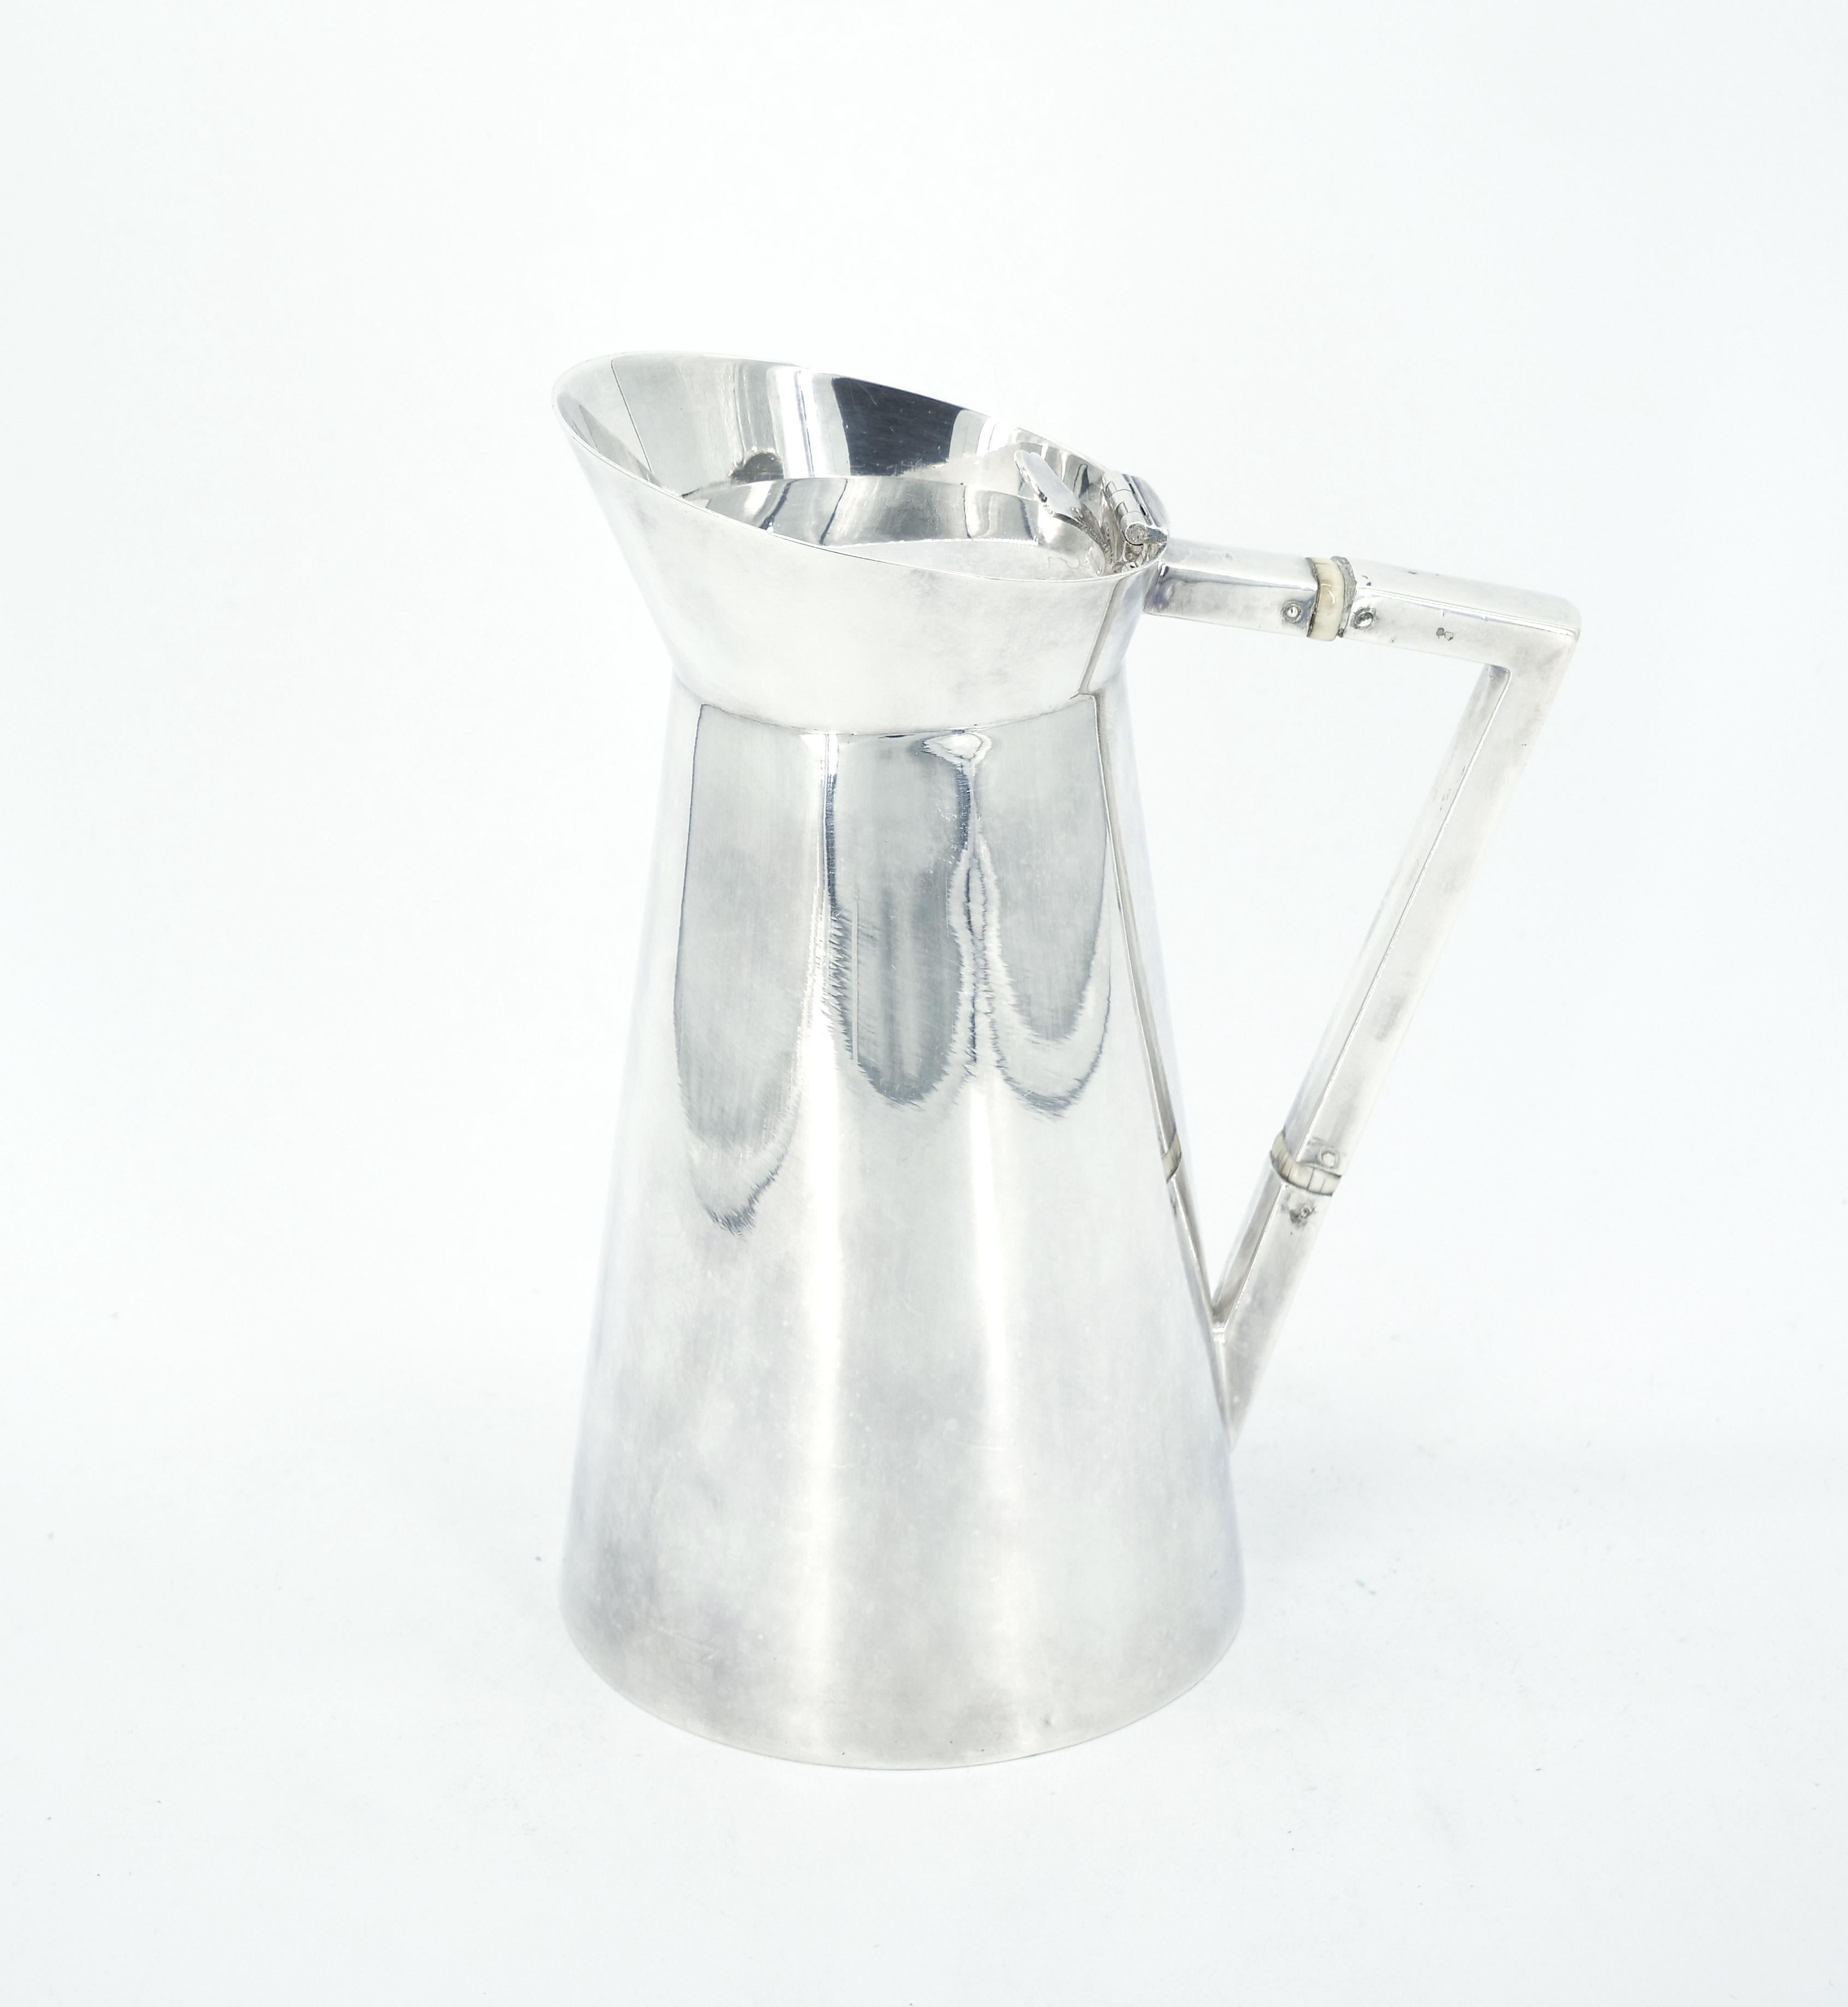 English Art Deco Period Silver Plate Water Jug or Chocolate Pot For Sale 2